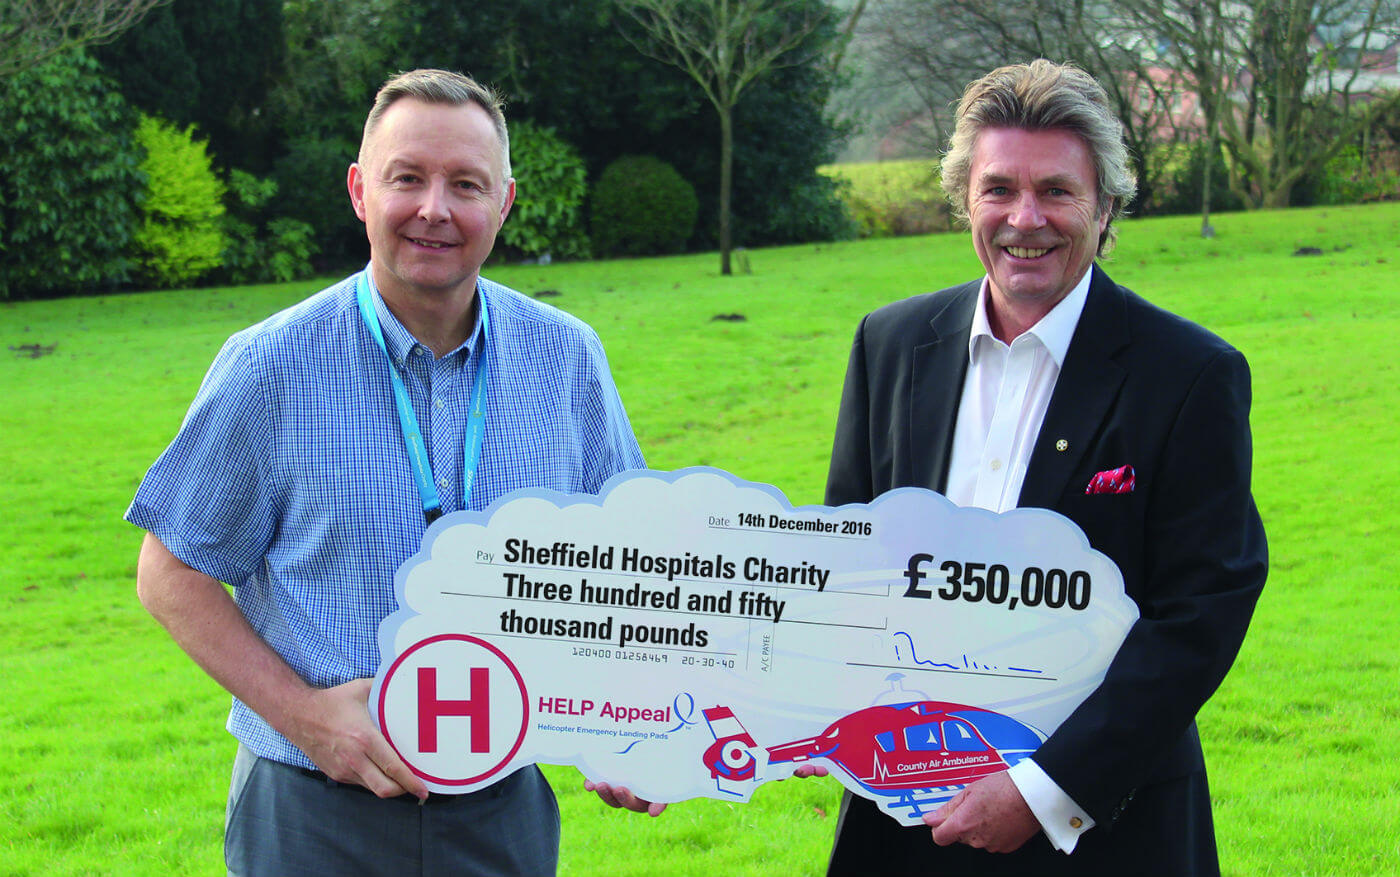 David Reynolds, director of Sheffield Hospitals Charity, receives the cheque from Robert Bertram, CEO, HELP Appeal. HELP Appeal Photo